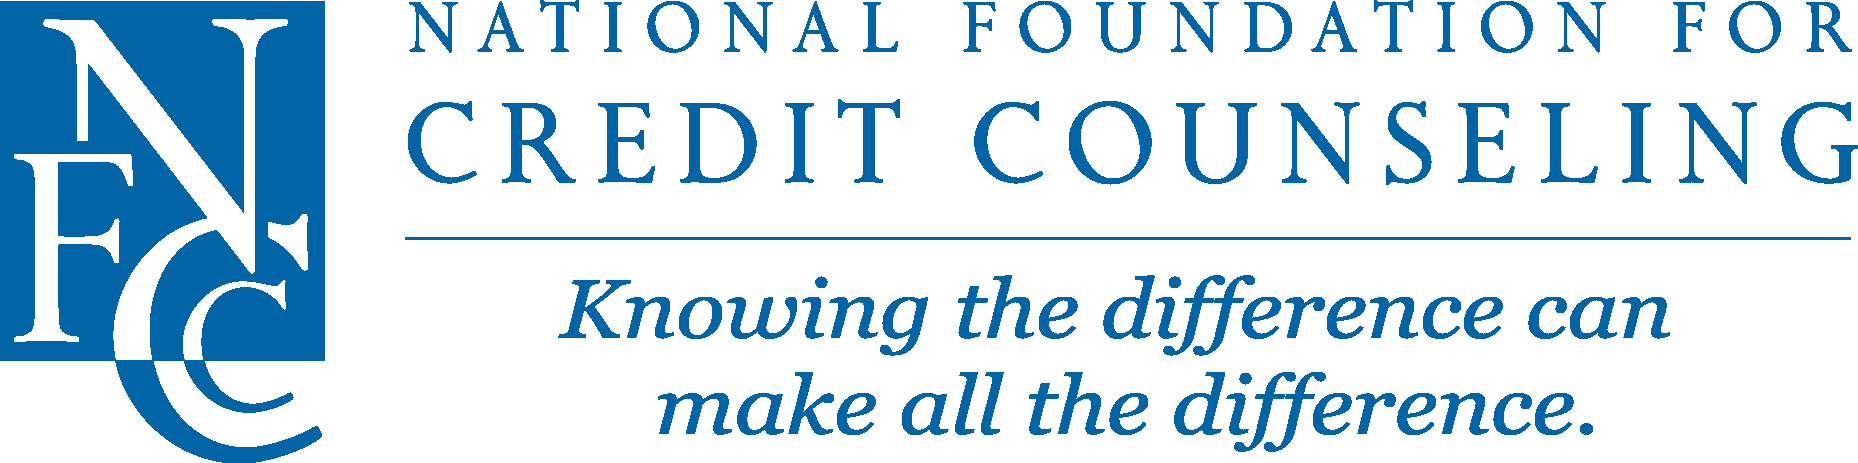 National Foundation for Credit Counseling Logo Vector